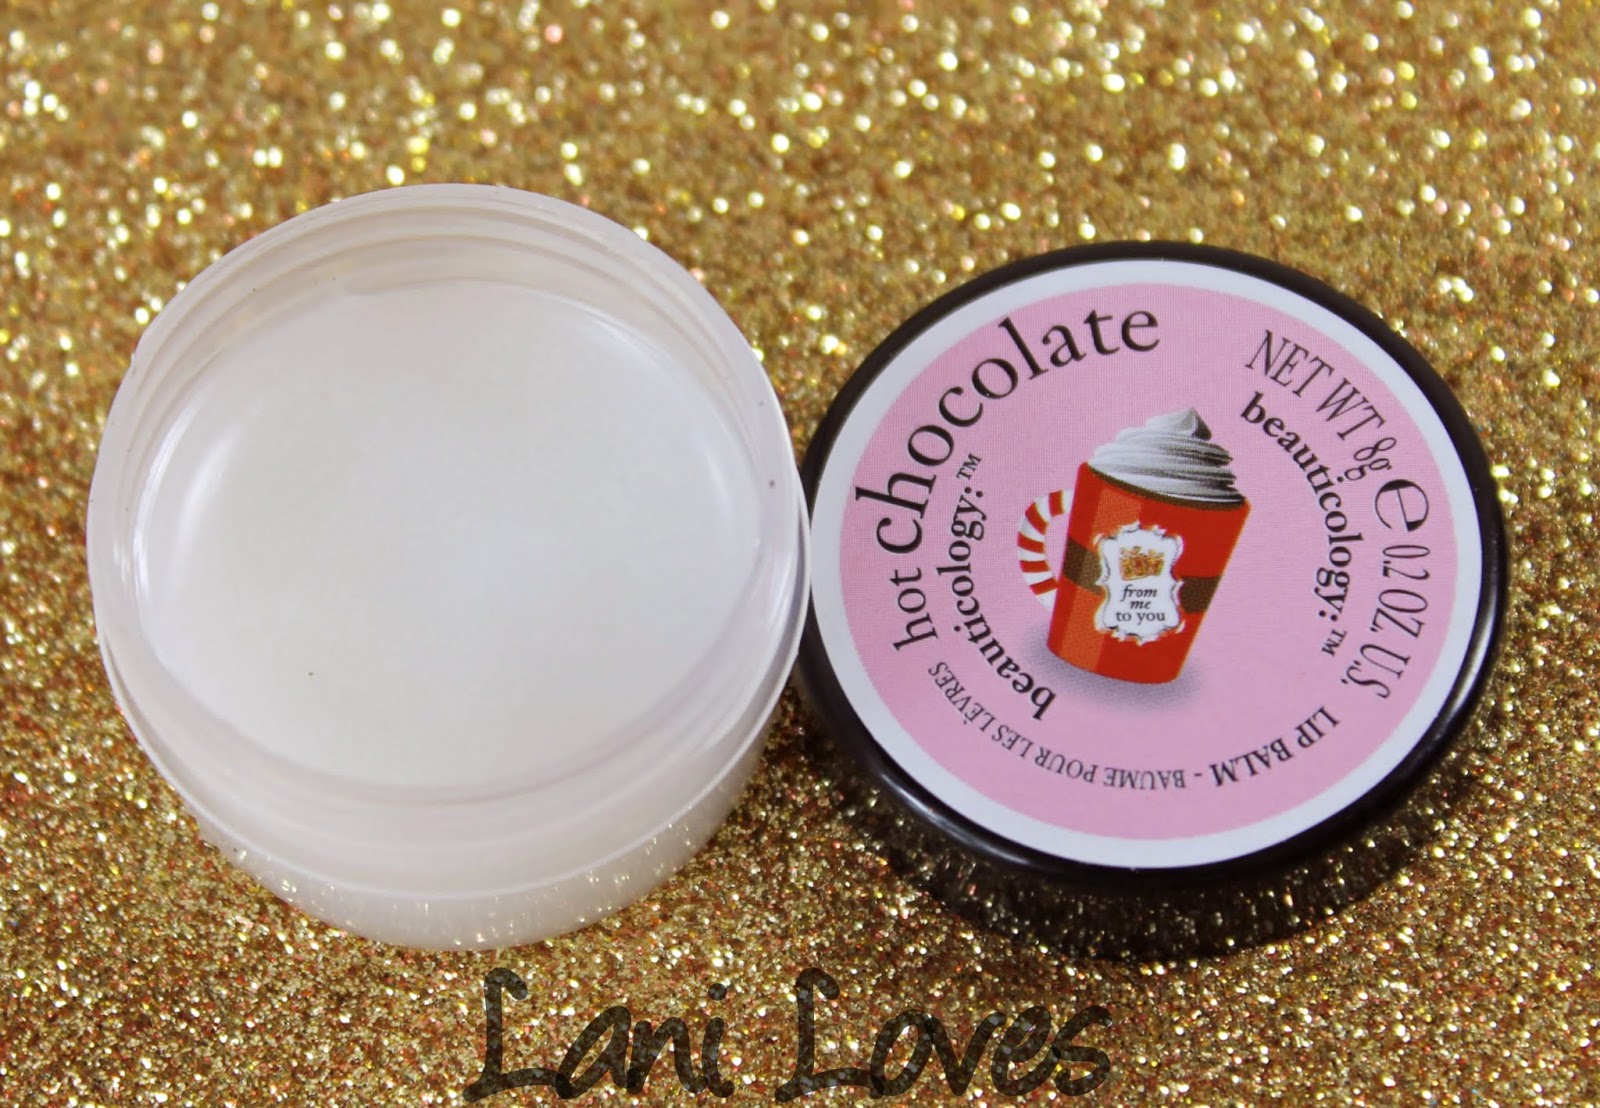 Beauticology Gingerbread Man Set - Hot Chocolate Lip Balm and Sweet Gingerbread Body Butter Photos & Review